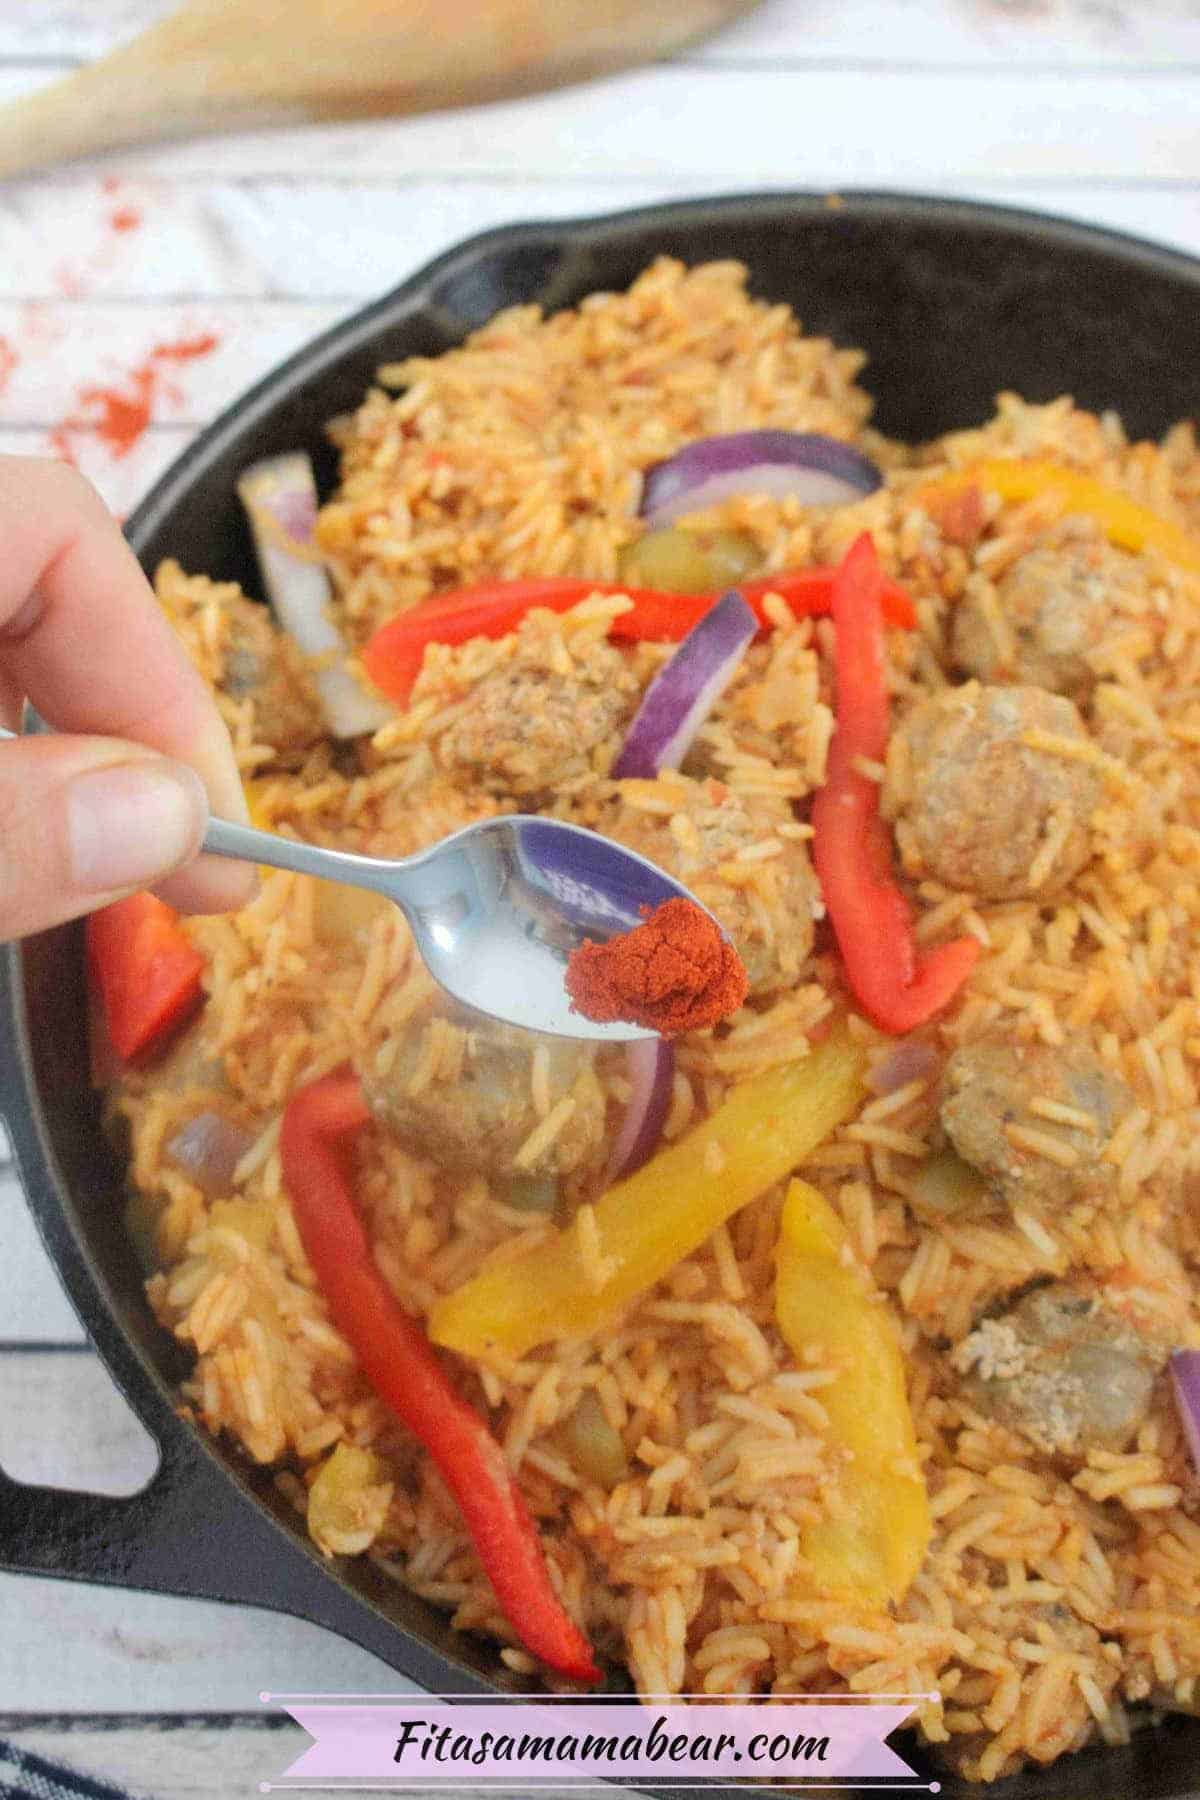 Sausage, rice, and bell peppers in a skillet.